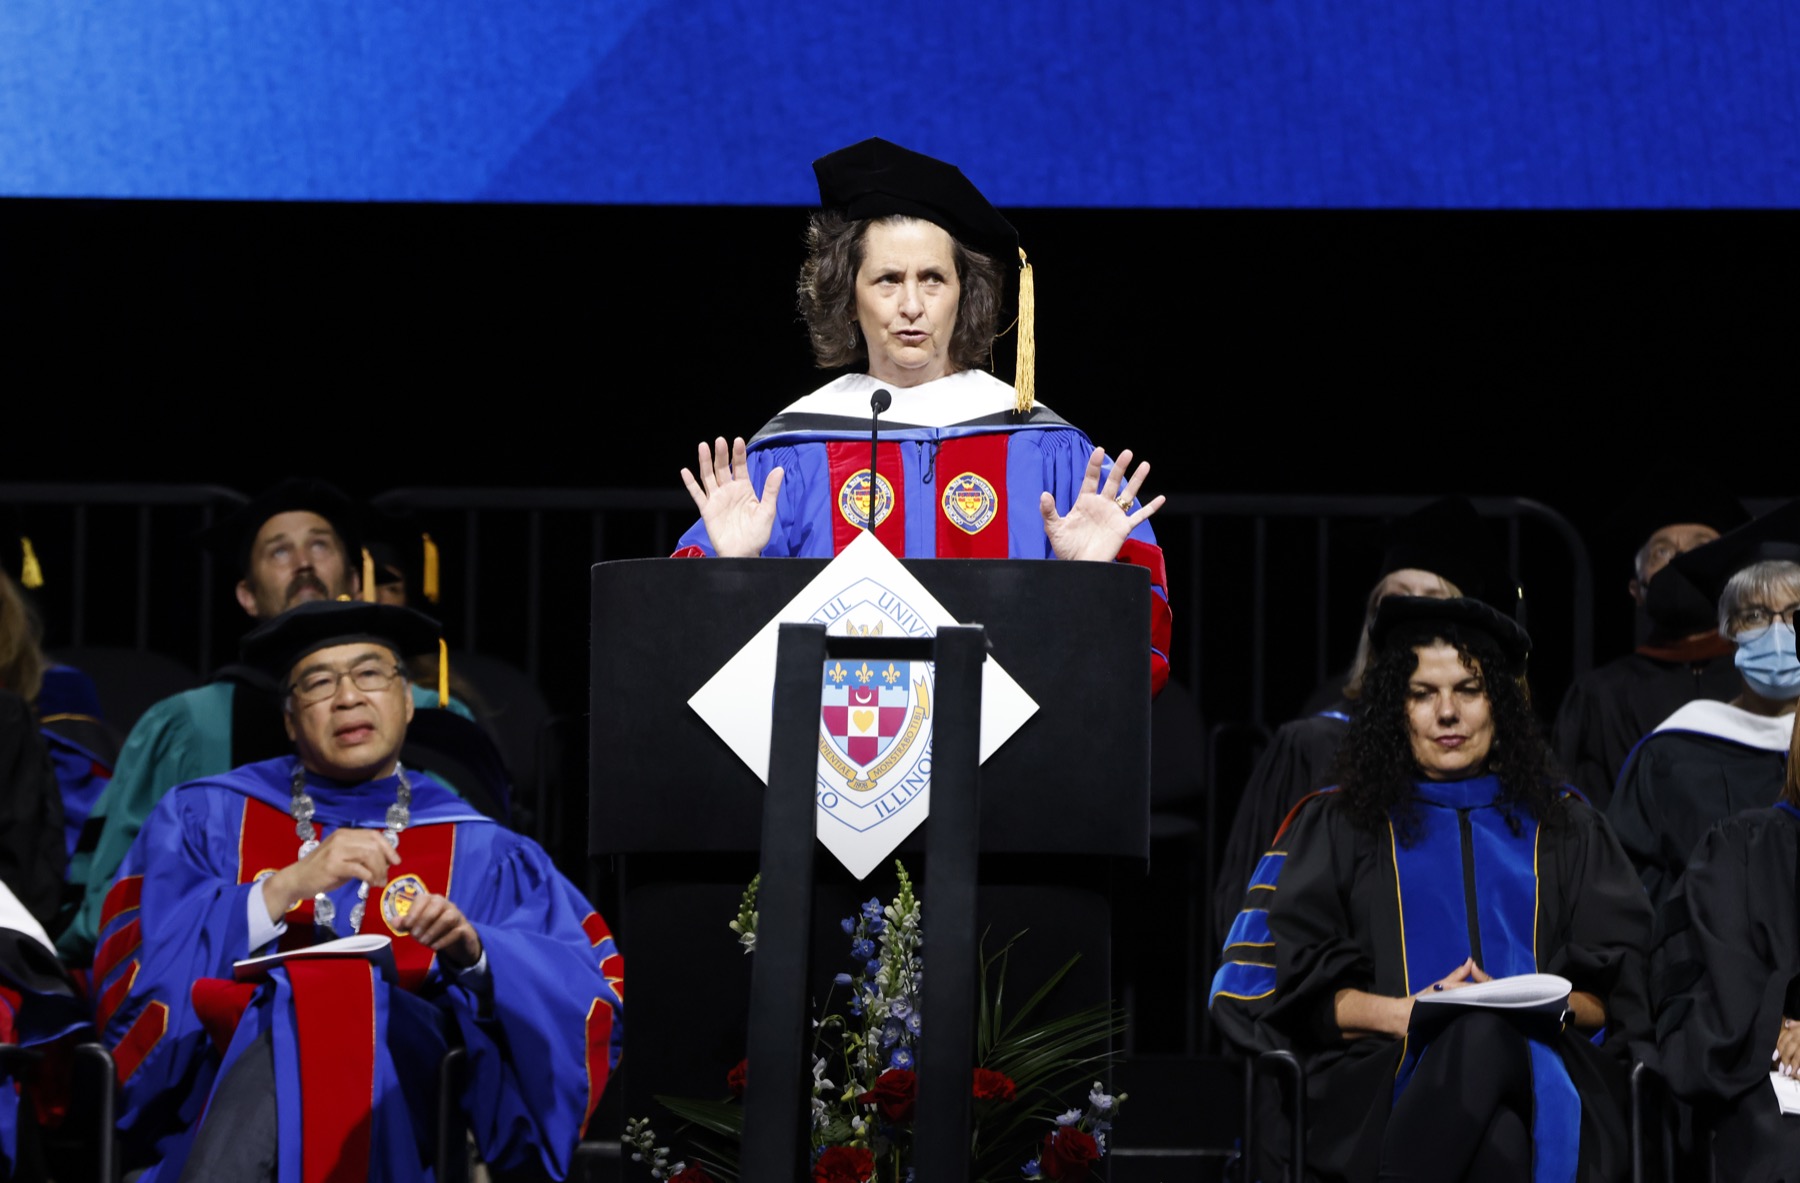 Gigi Pritzker Pucker presented her commencement address and shares the impact one DePaul faculty had on her career.